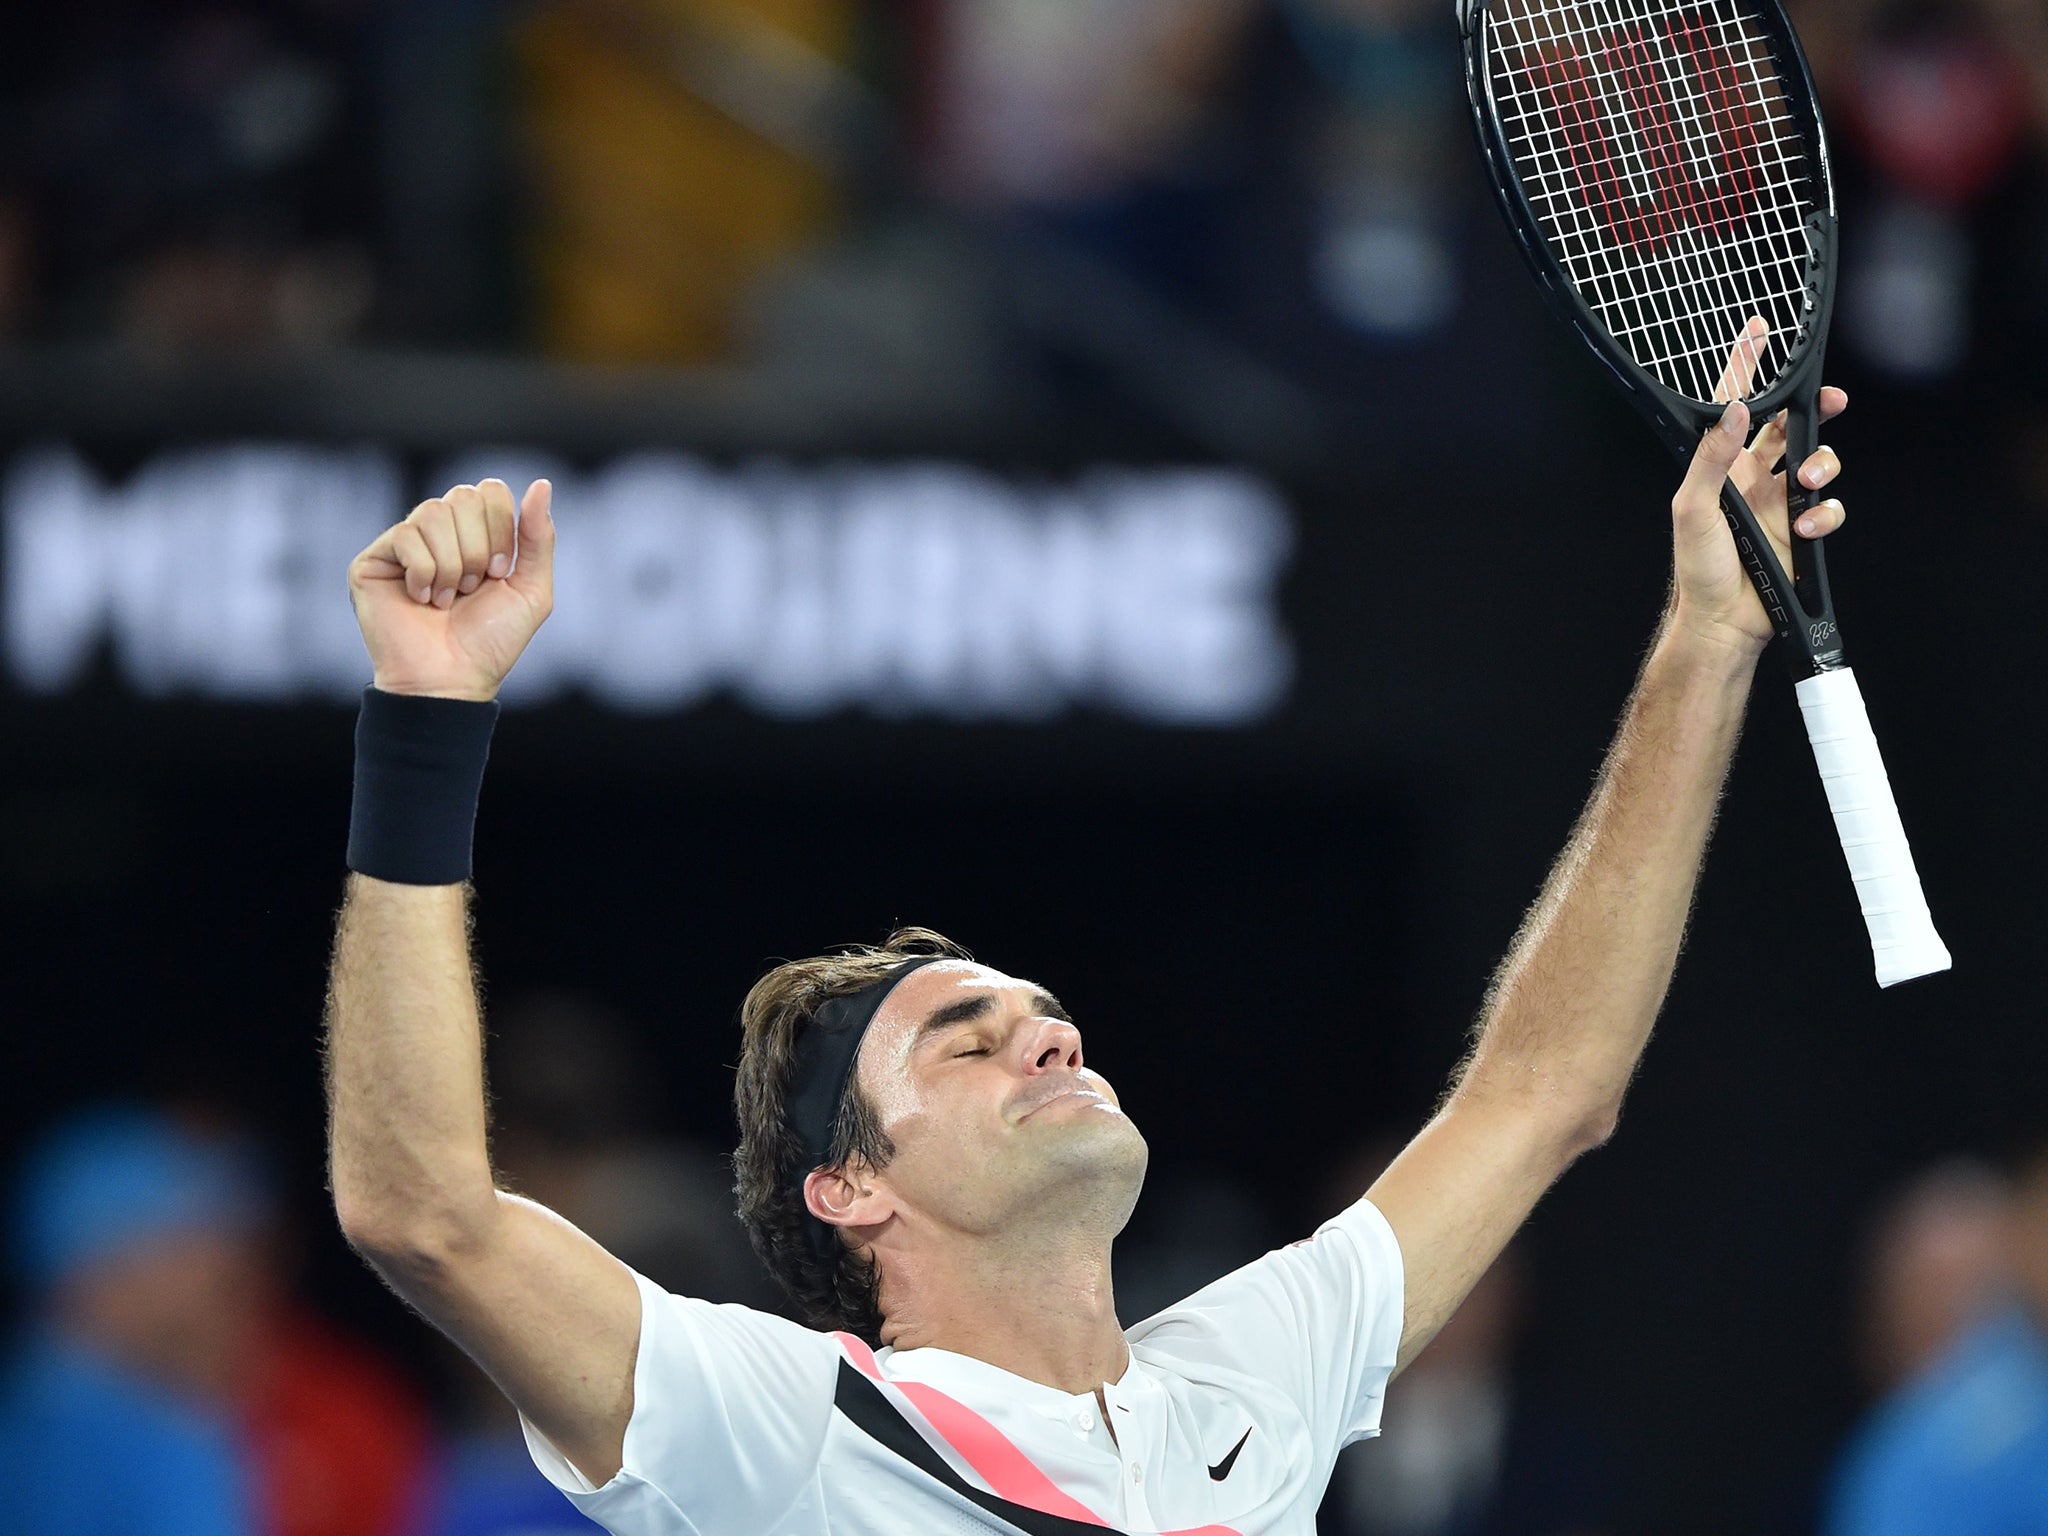 Roger Federer has become the first man to win 20 Grand Slam titles